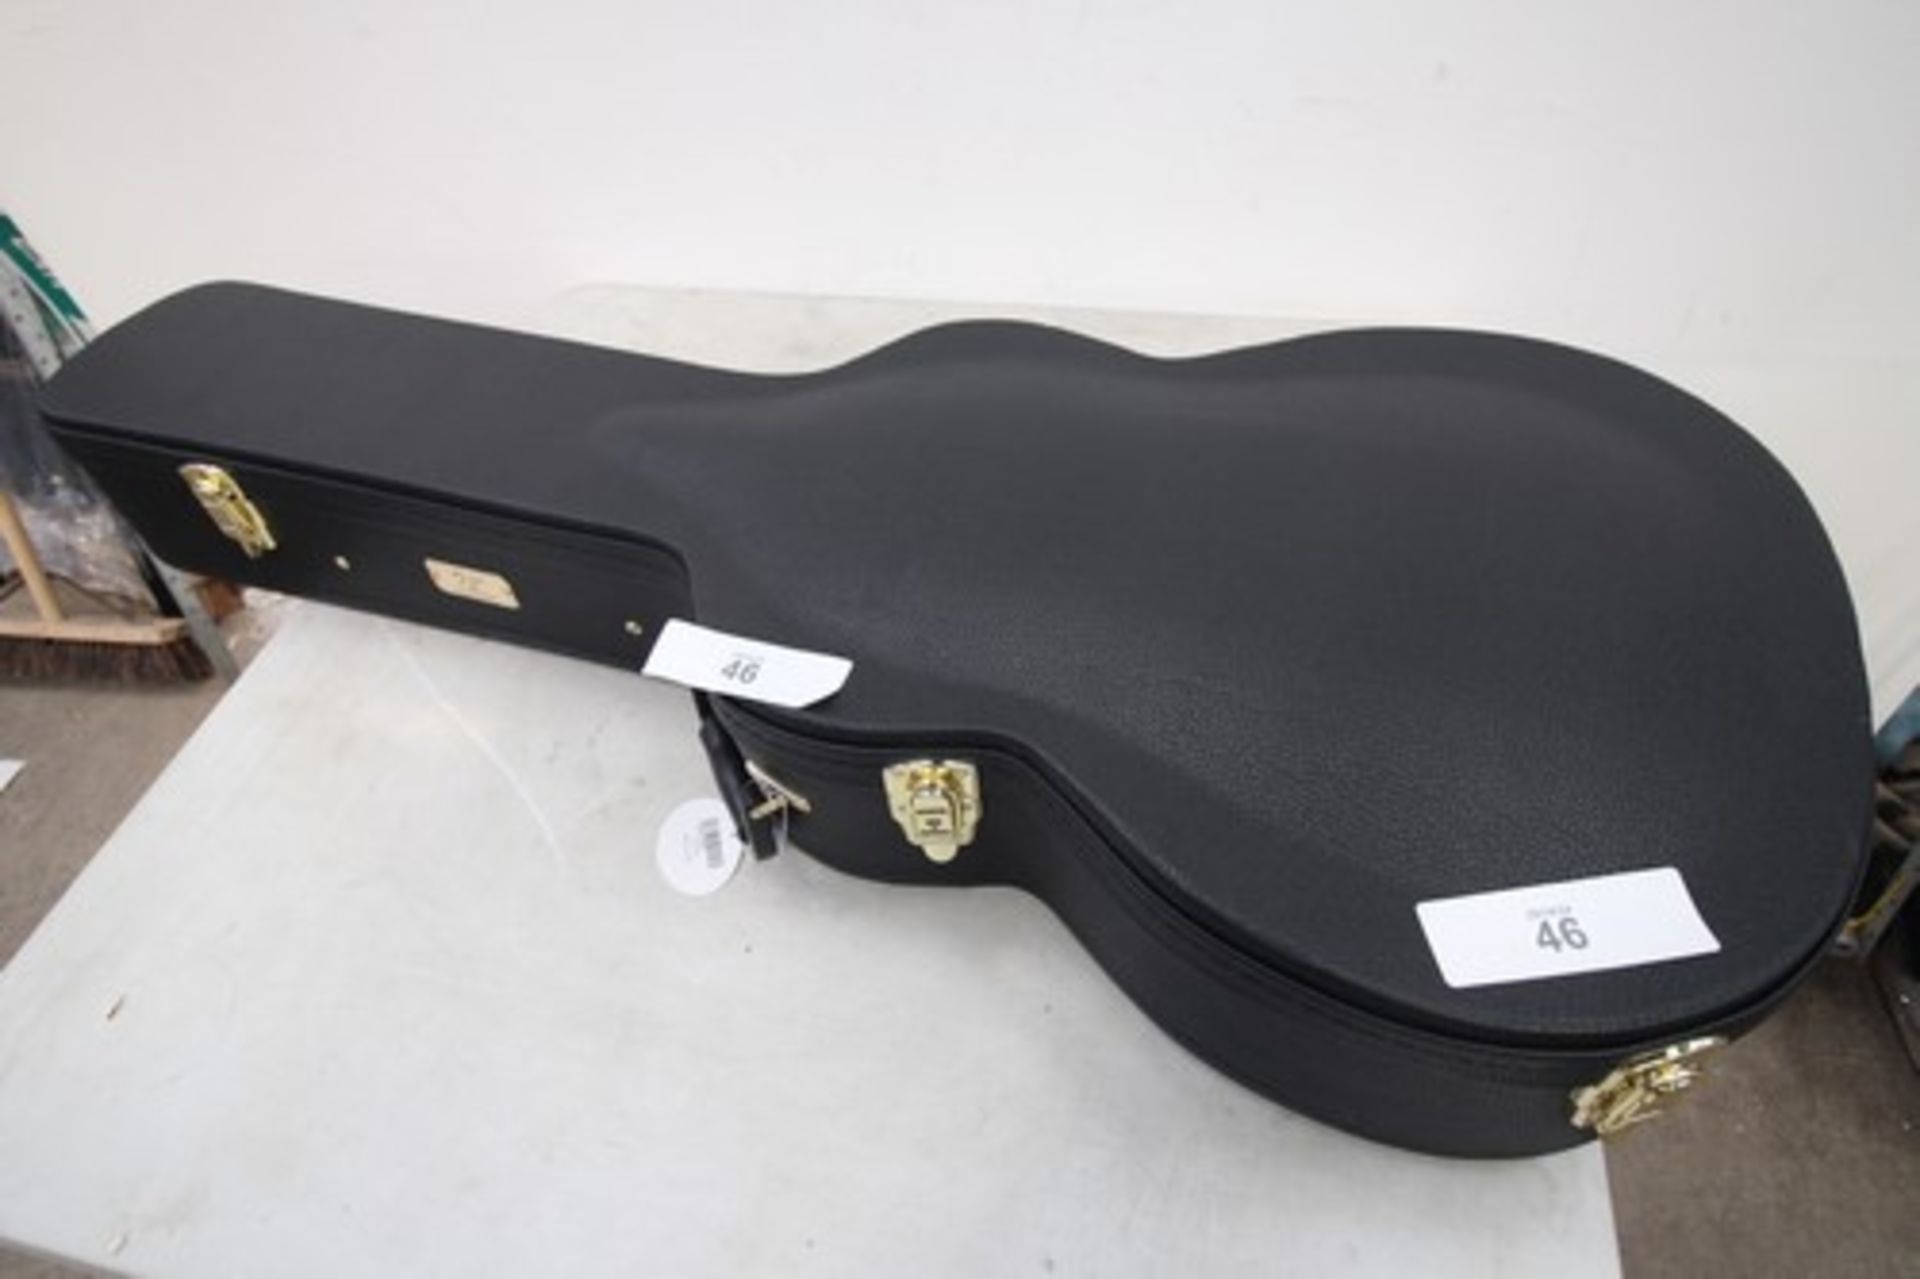 1 x Fender Paramount PO-22OE Orchestra electro acoustic guitar, in carry case - new in box (ES2) - Image 3 of 4